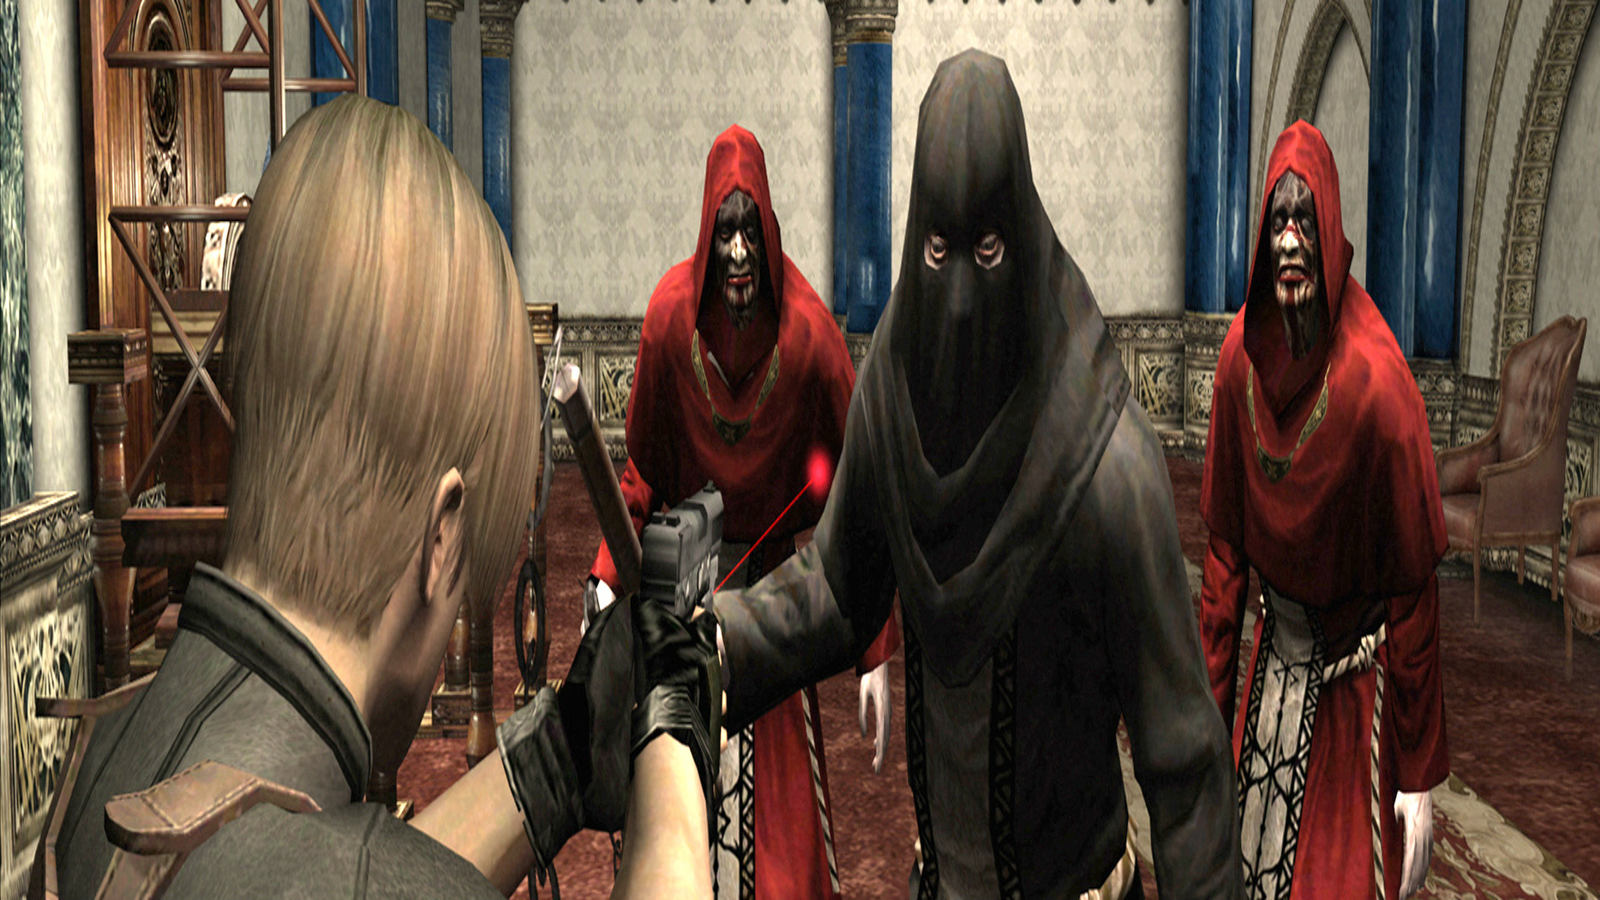 Buy Resident Evil 4: Ultimate HD Edition Steam PC Key 